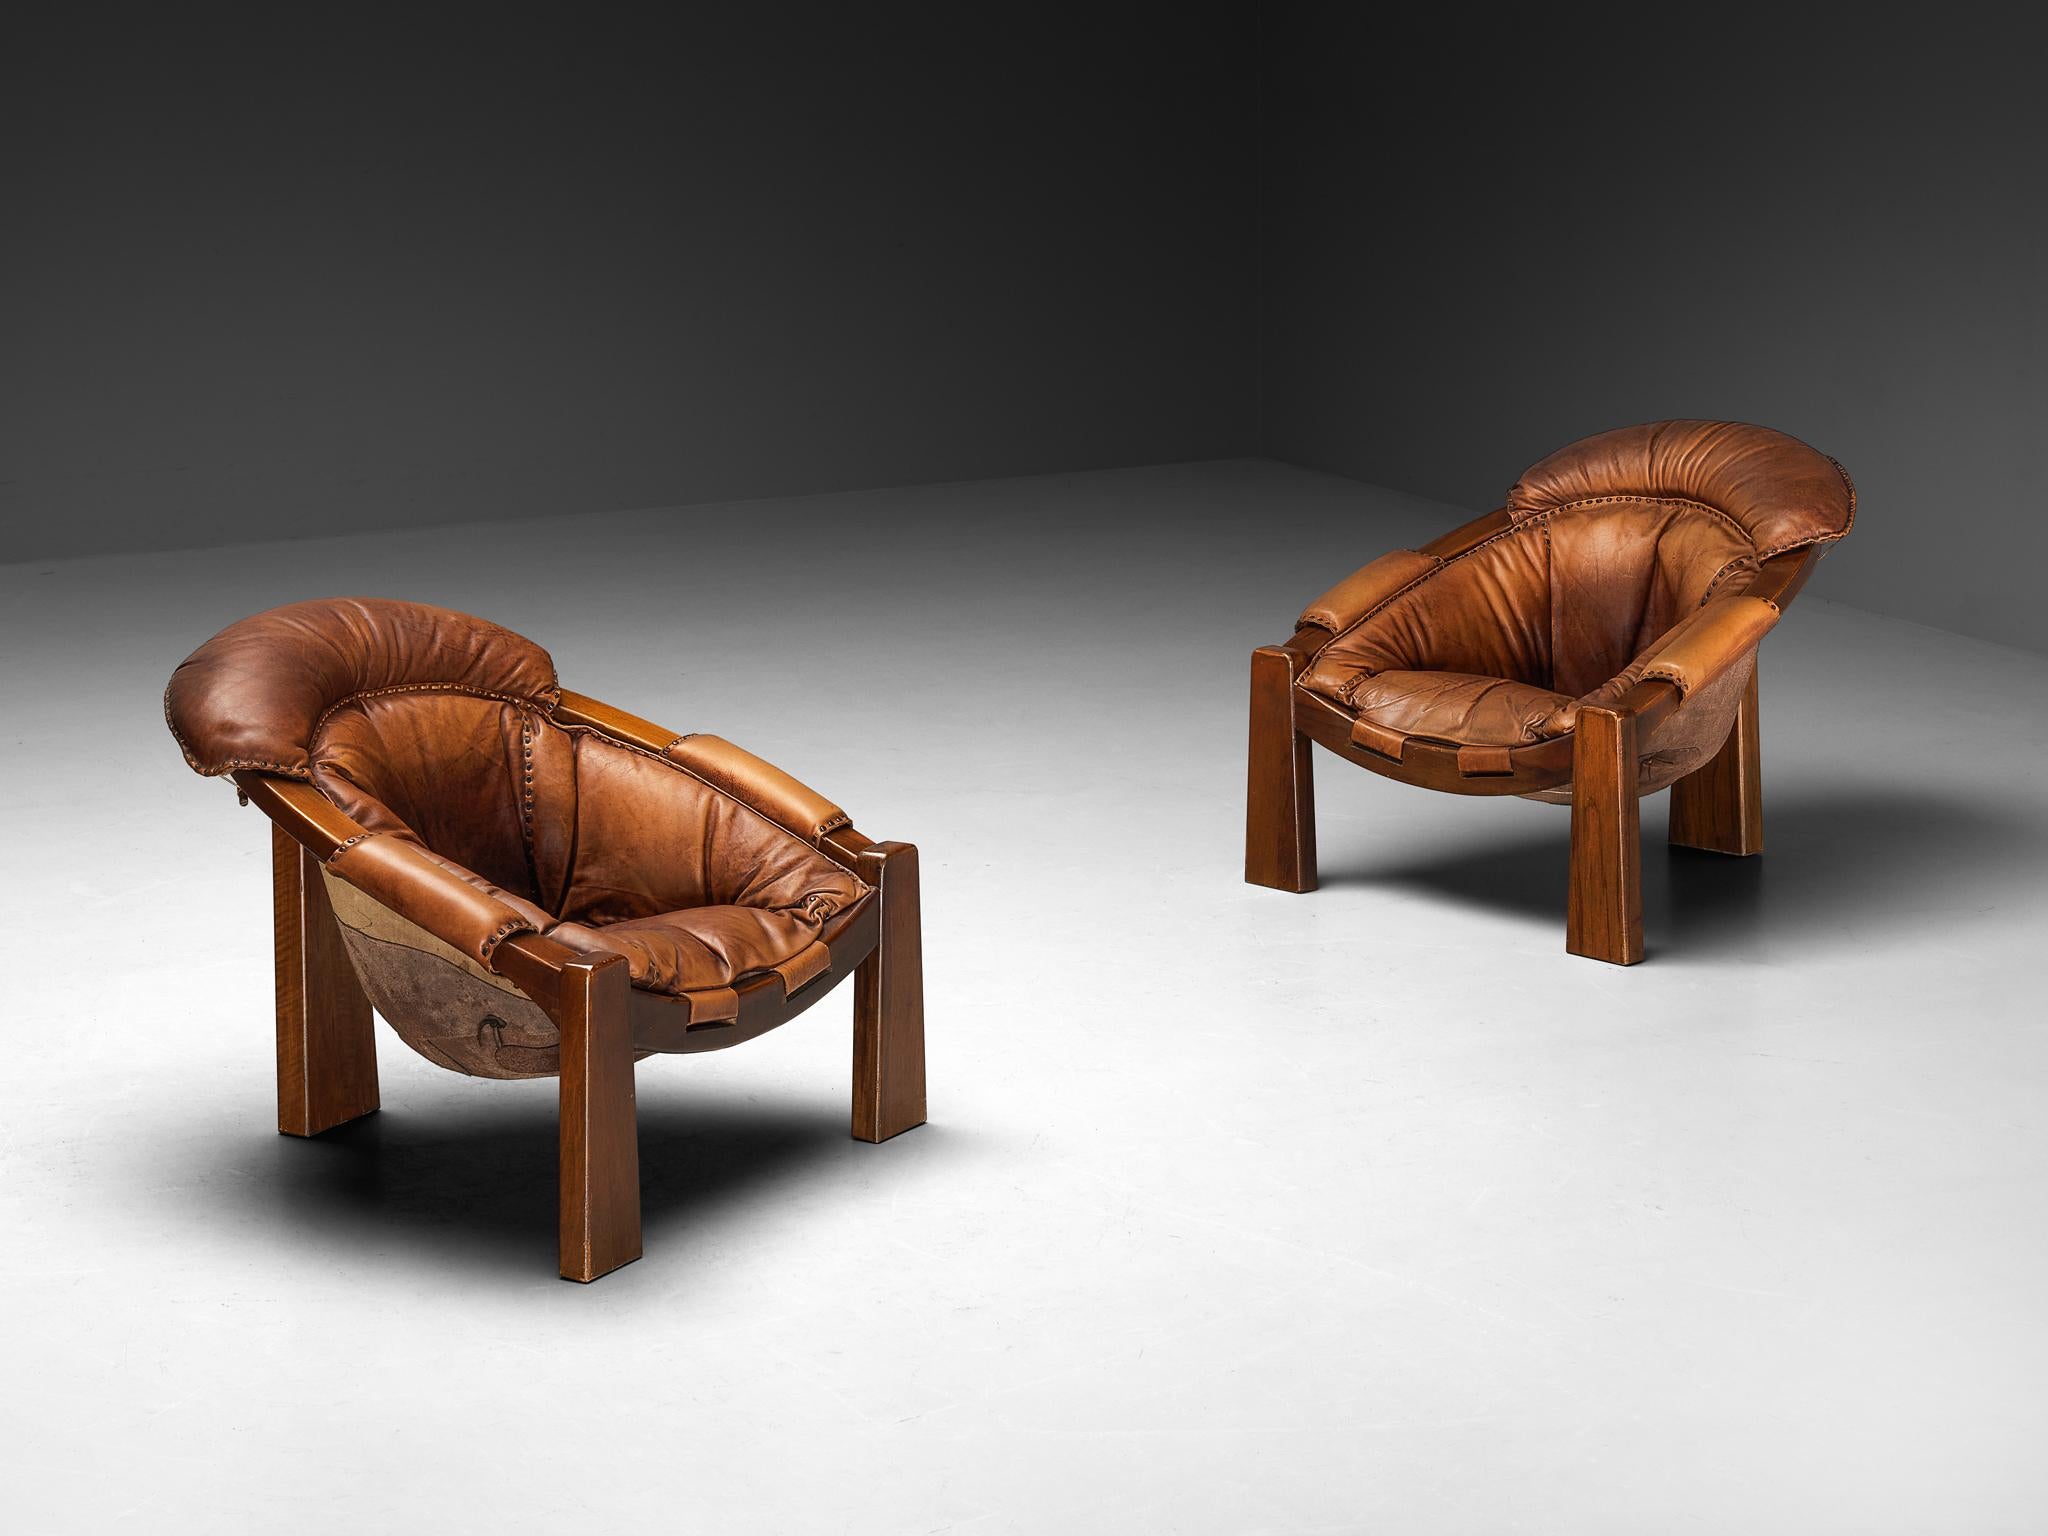 Luciano Frigerio pair of armchairs, leather, mahogany, Italy, 1970s

Step into the embrace of timeless sophistication with this captivating pair of armchairs by the esteemed Italian designer Luciano Frigerio, skillfully crafted during the